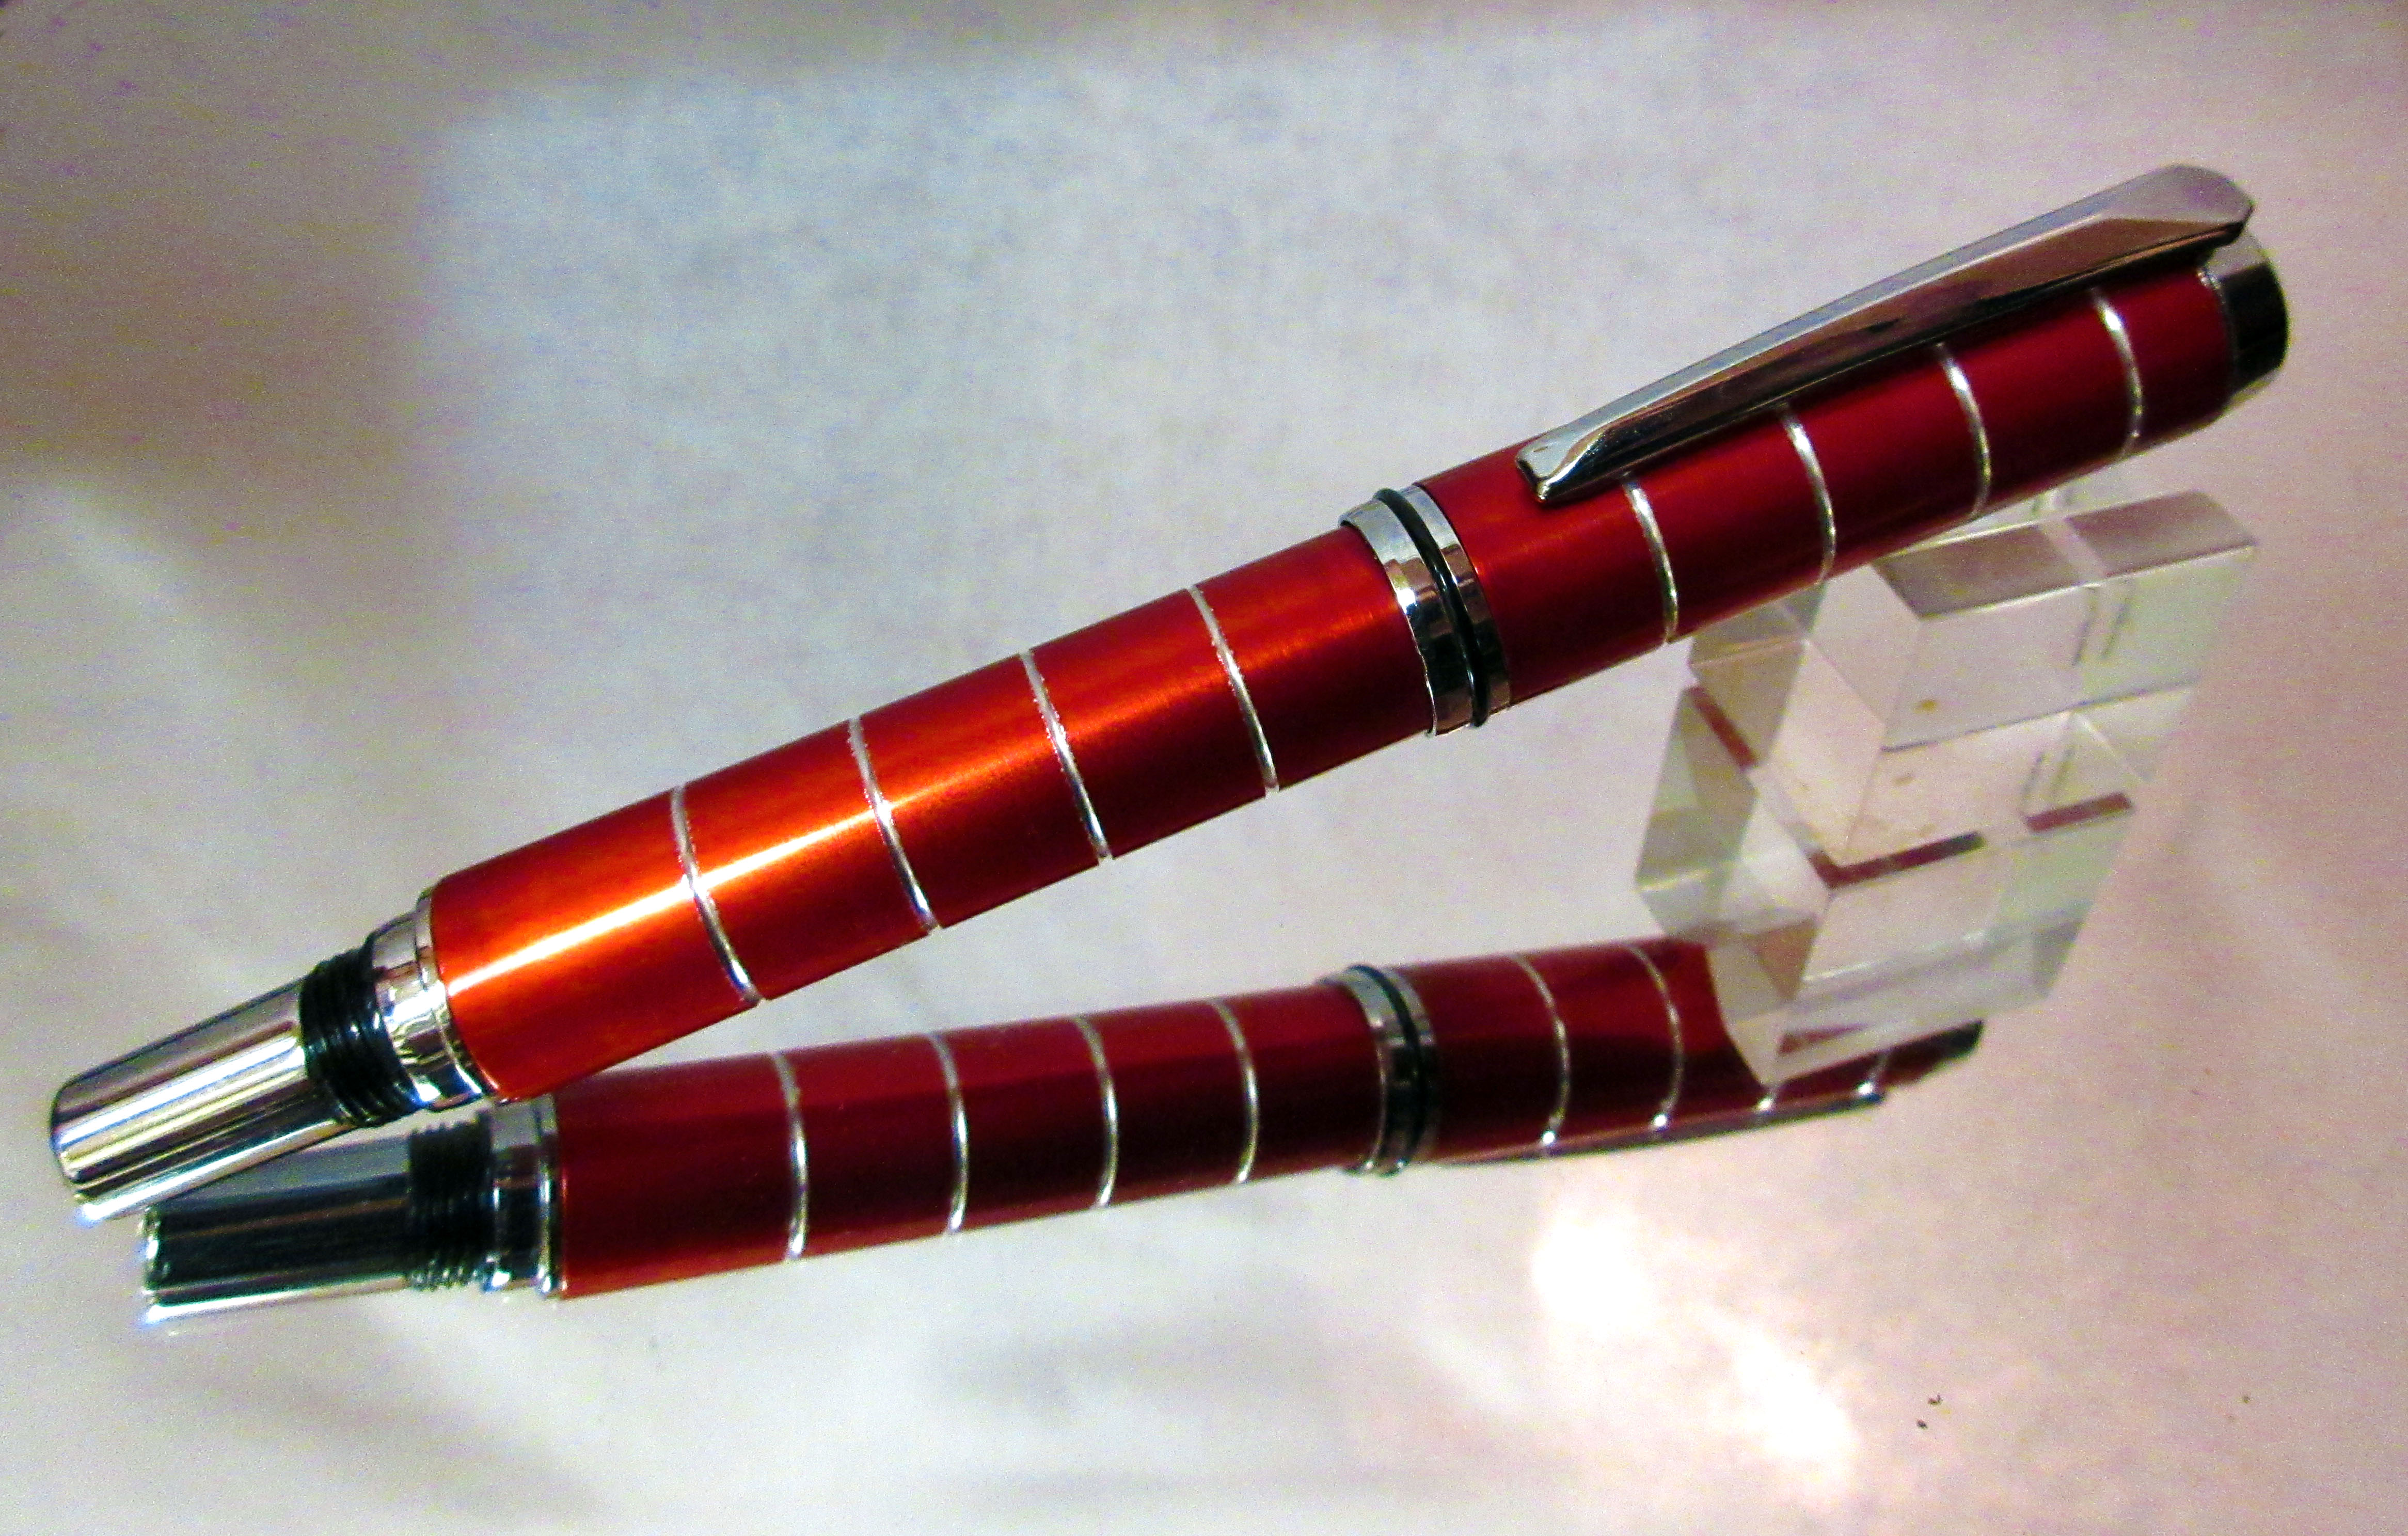 A Red fountain pen crafted from aluminium